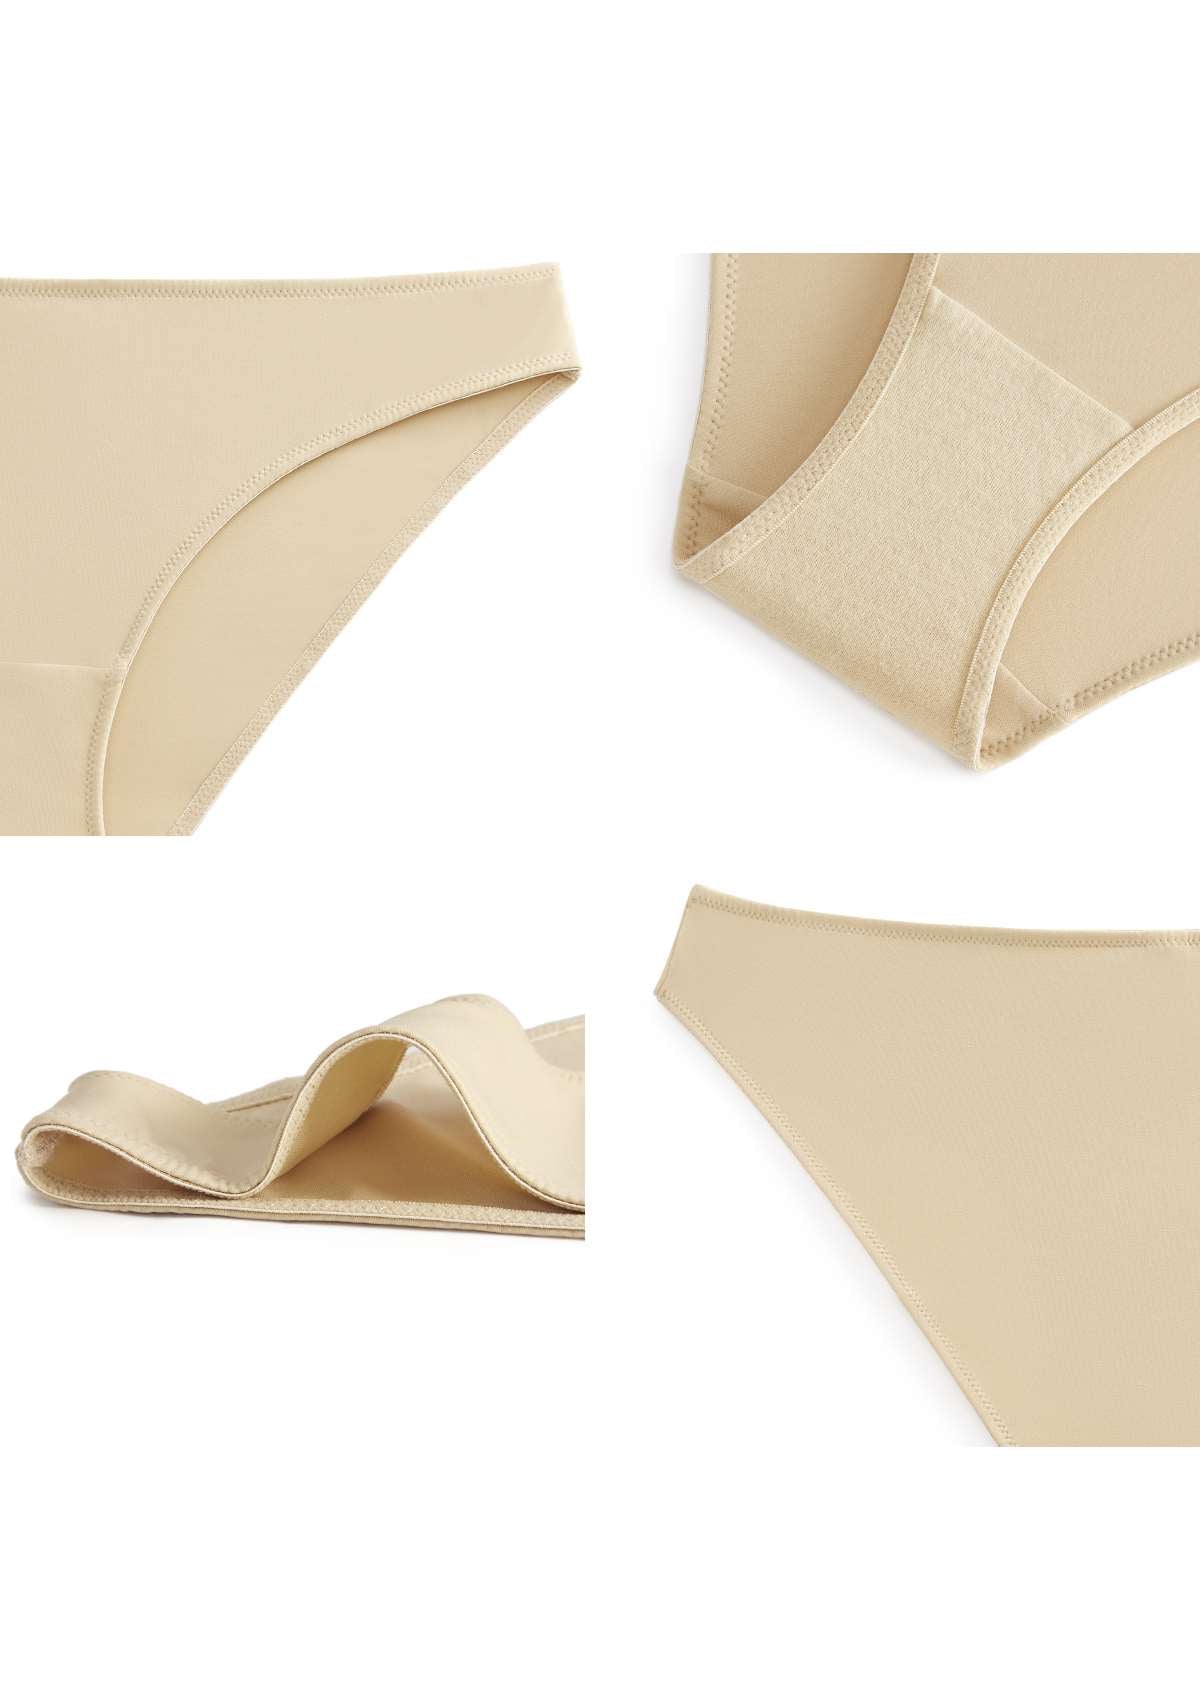 HSIA Patricia Smooth Classic Soft Stretch Panty - Everyday Comfort - L / Beige